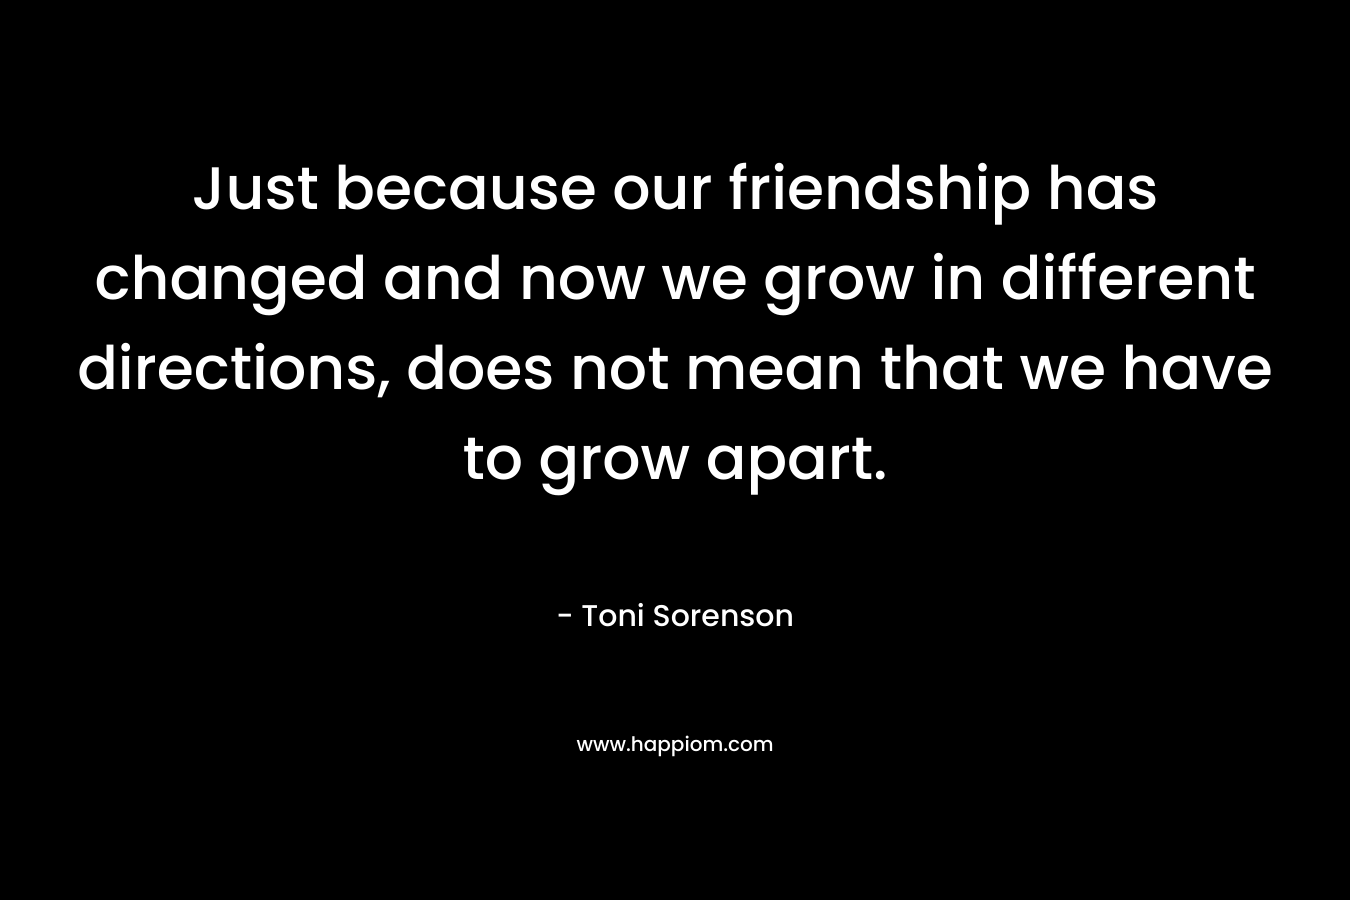 Just because our friendship has changed and now we grow in different directions, does not mean that we have to grow apart.